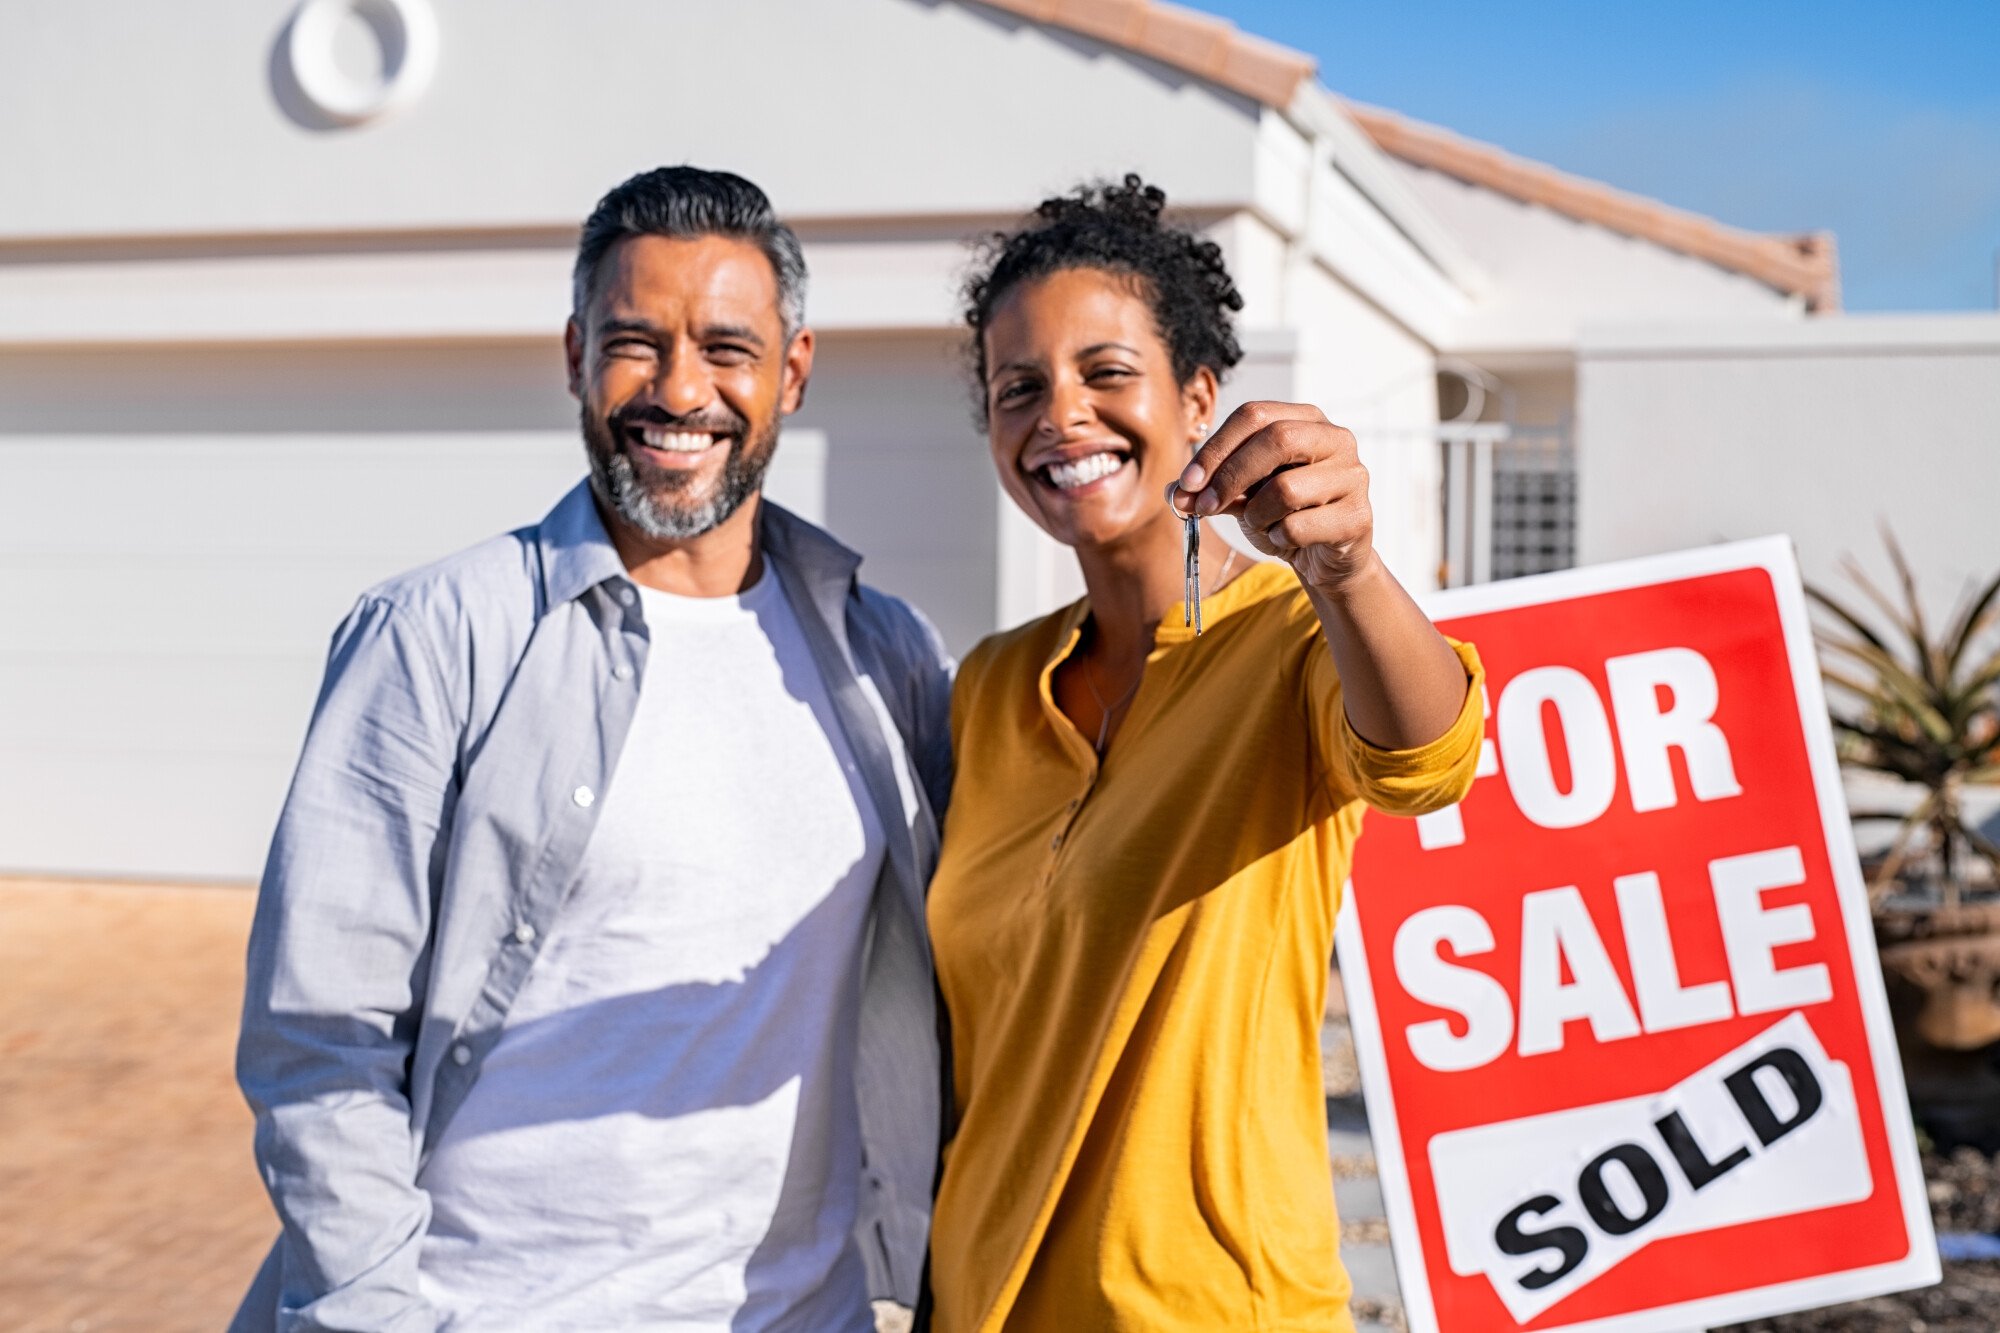 We Buy Homes 4 Cash: The Benefits of Quick Cash House Sales